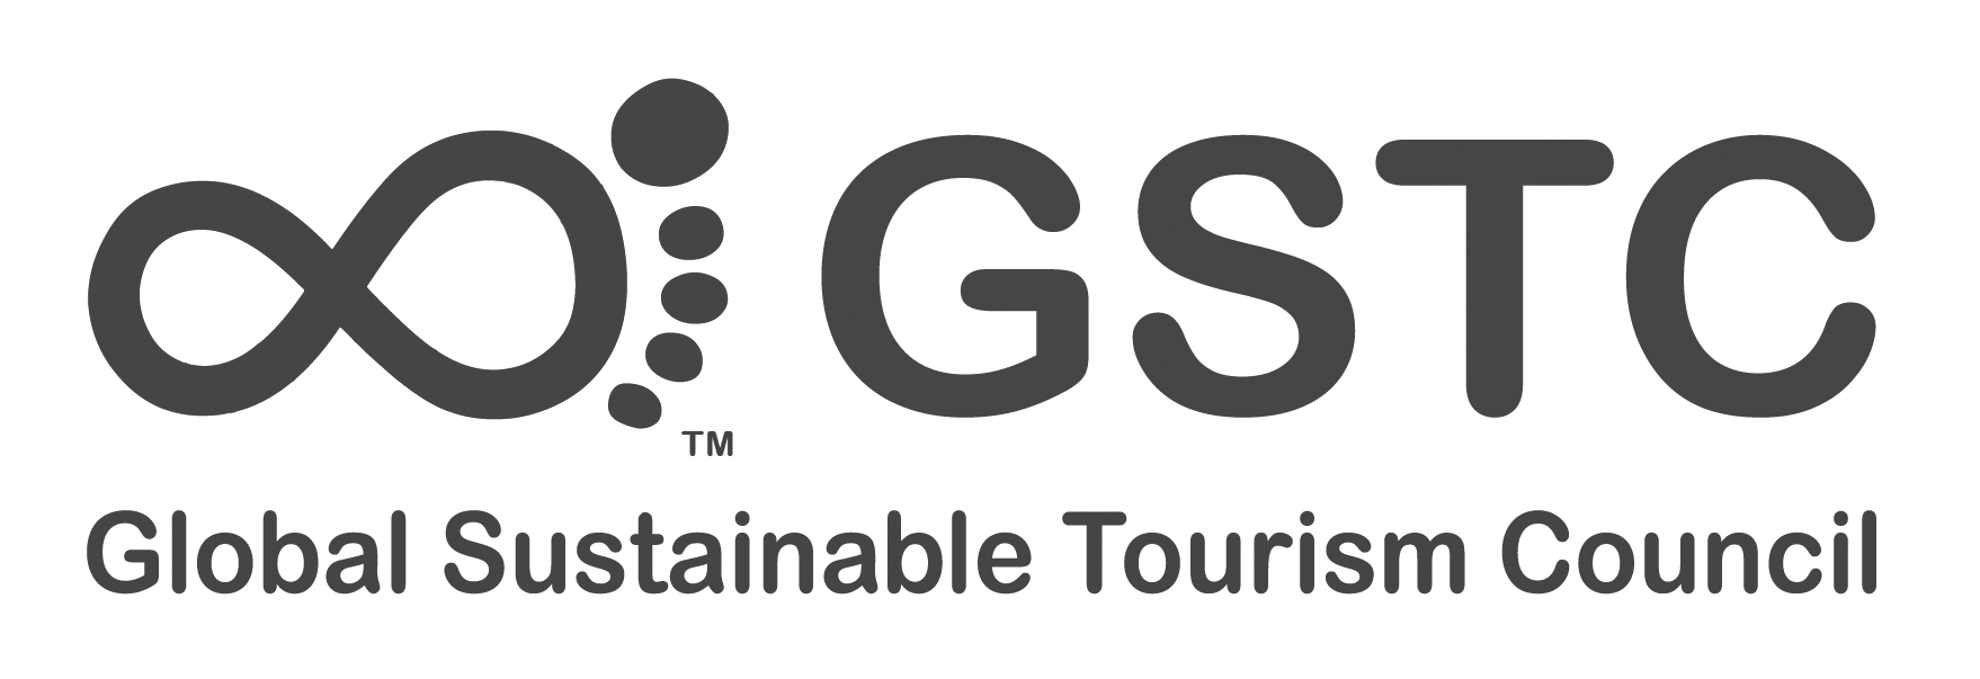 Global Sustainable Tourism Council 